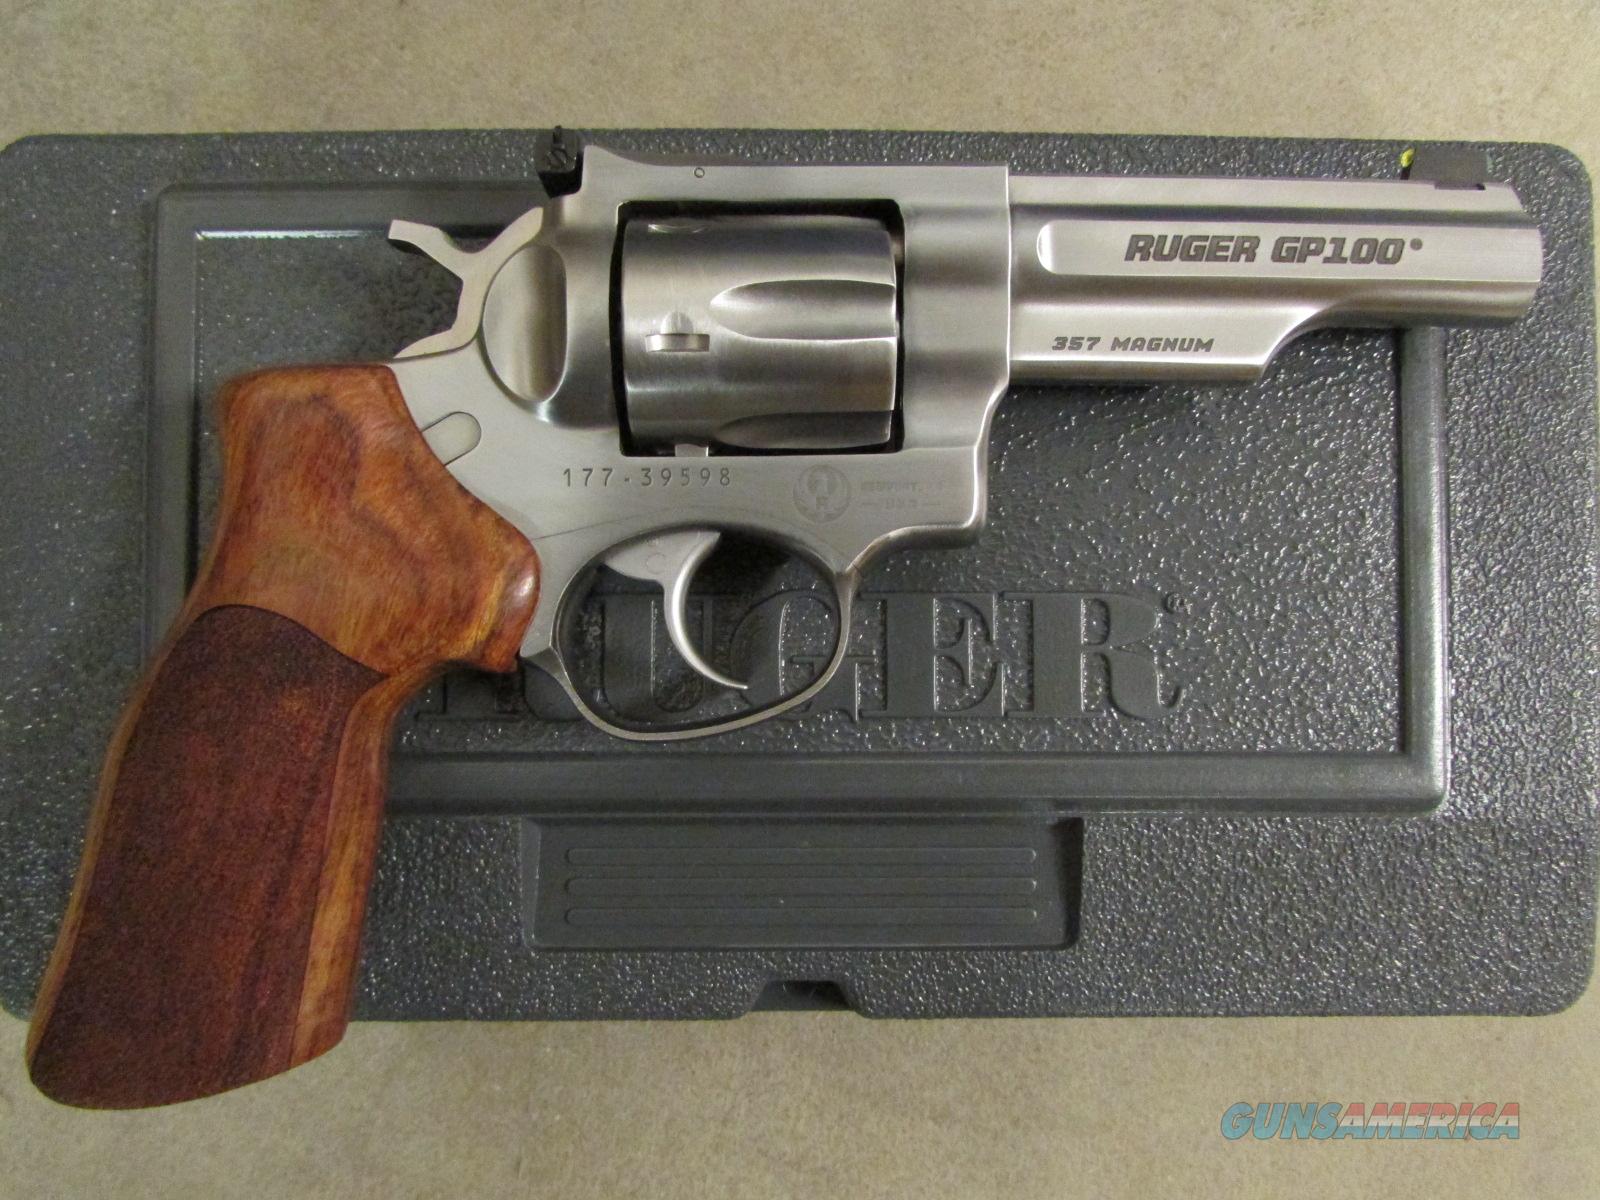 Ruger Gp100 Match Champion Double A For Sale At 968041939 8558